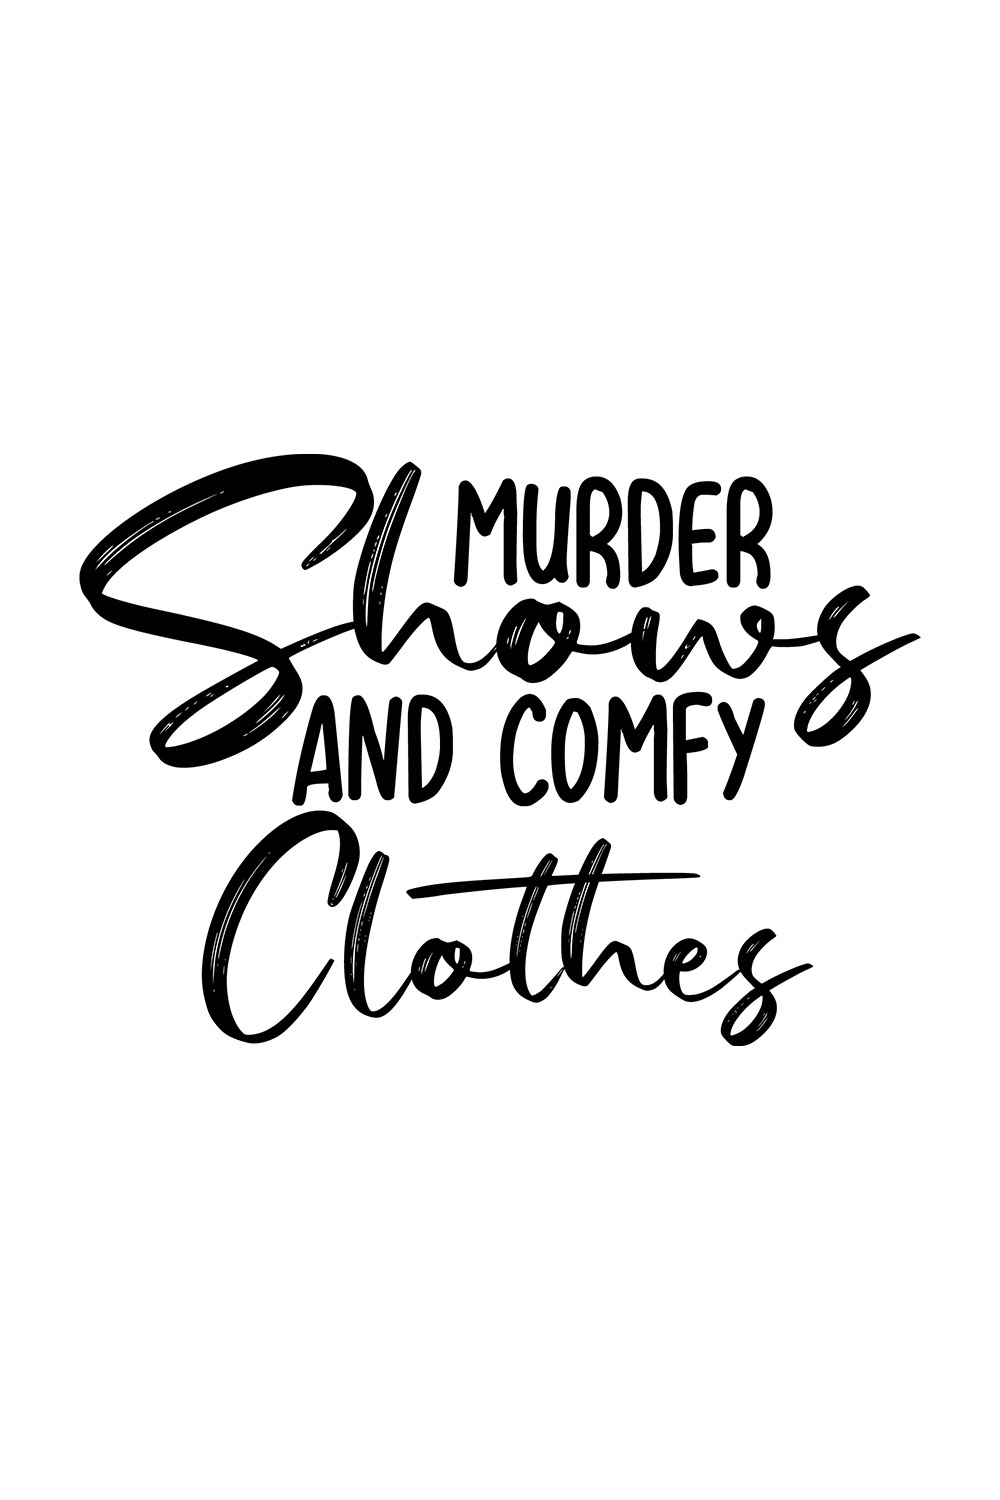 Image with gorgeous black lettering Murder Shows and Comfy Clothes.